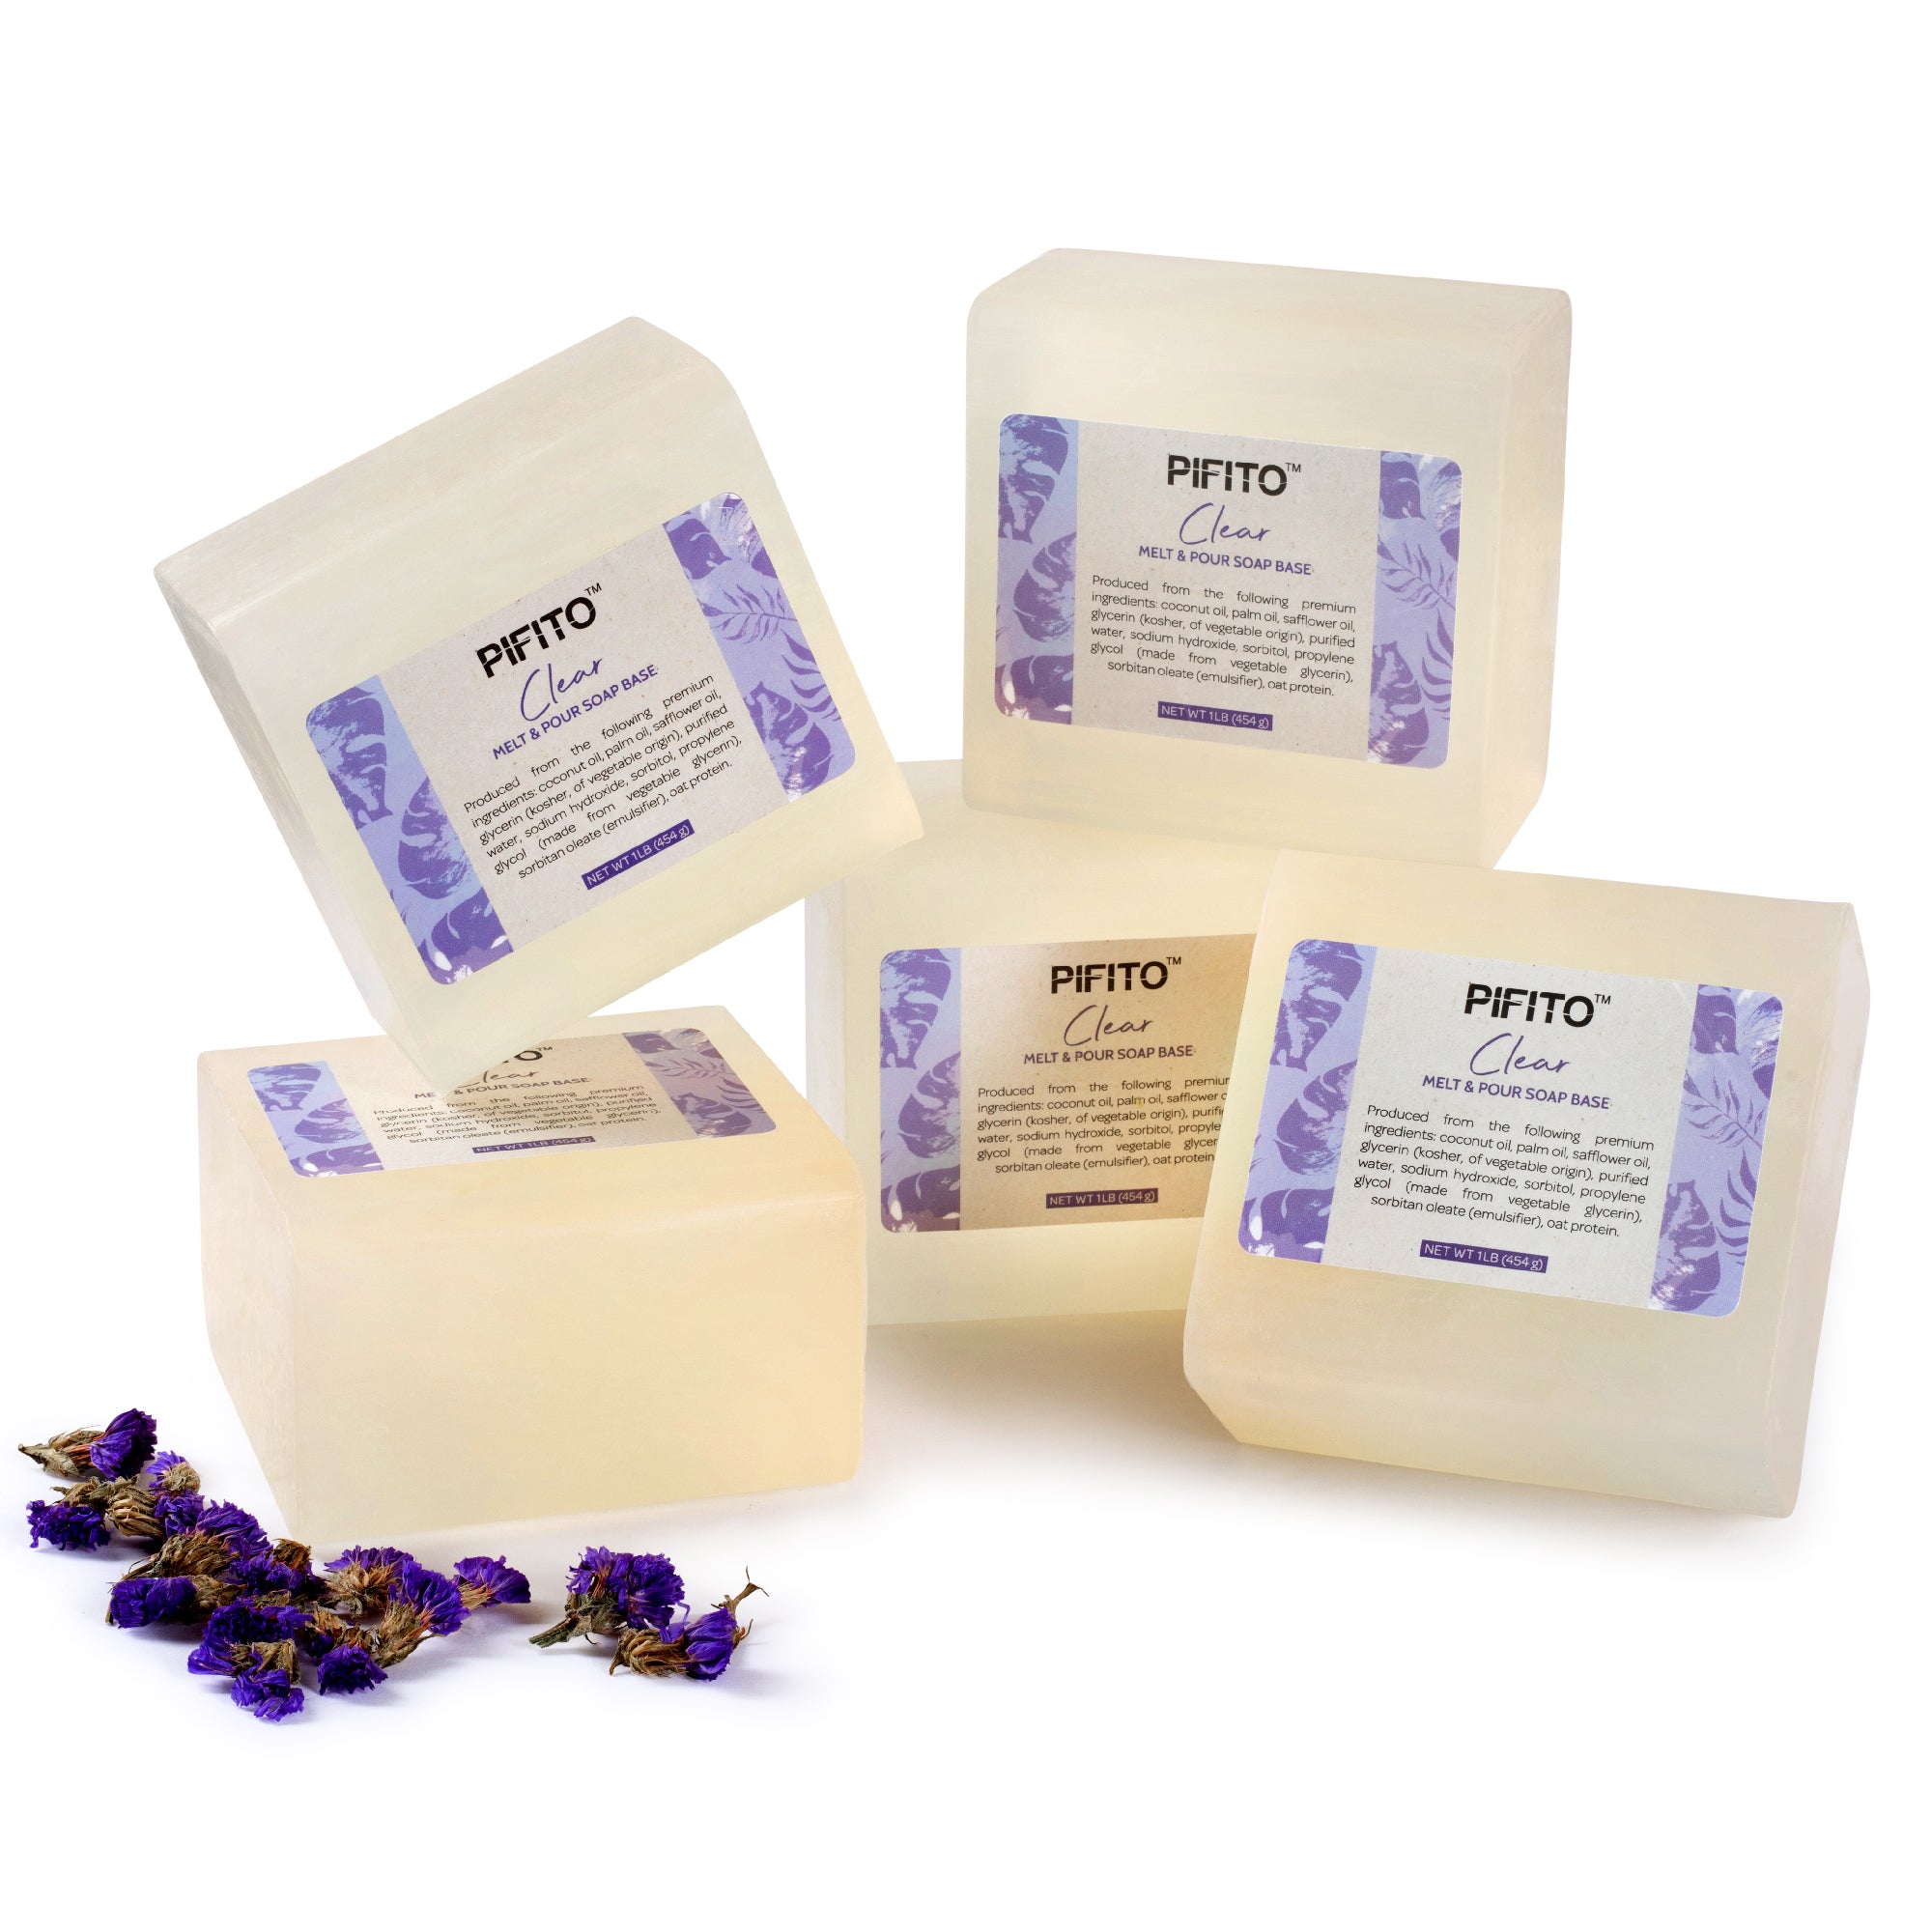 Pifito Premium Cocoa Butter Melt and Pour Soap Base Making Supplies